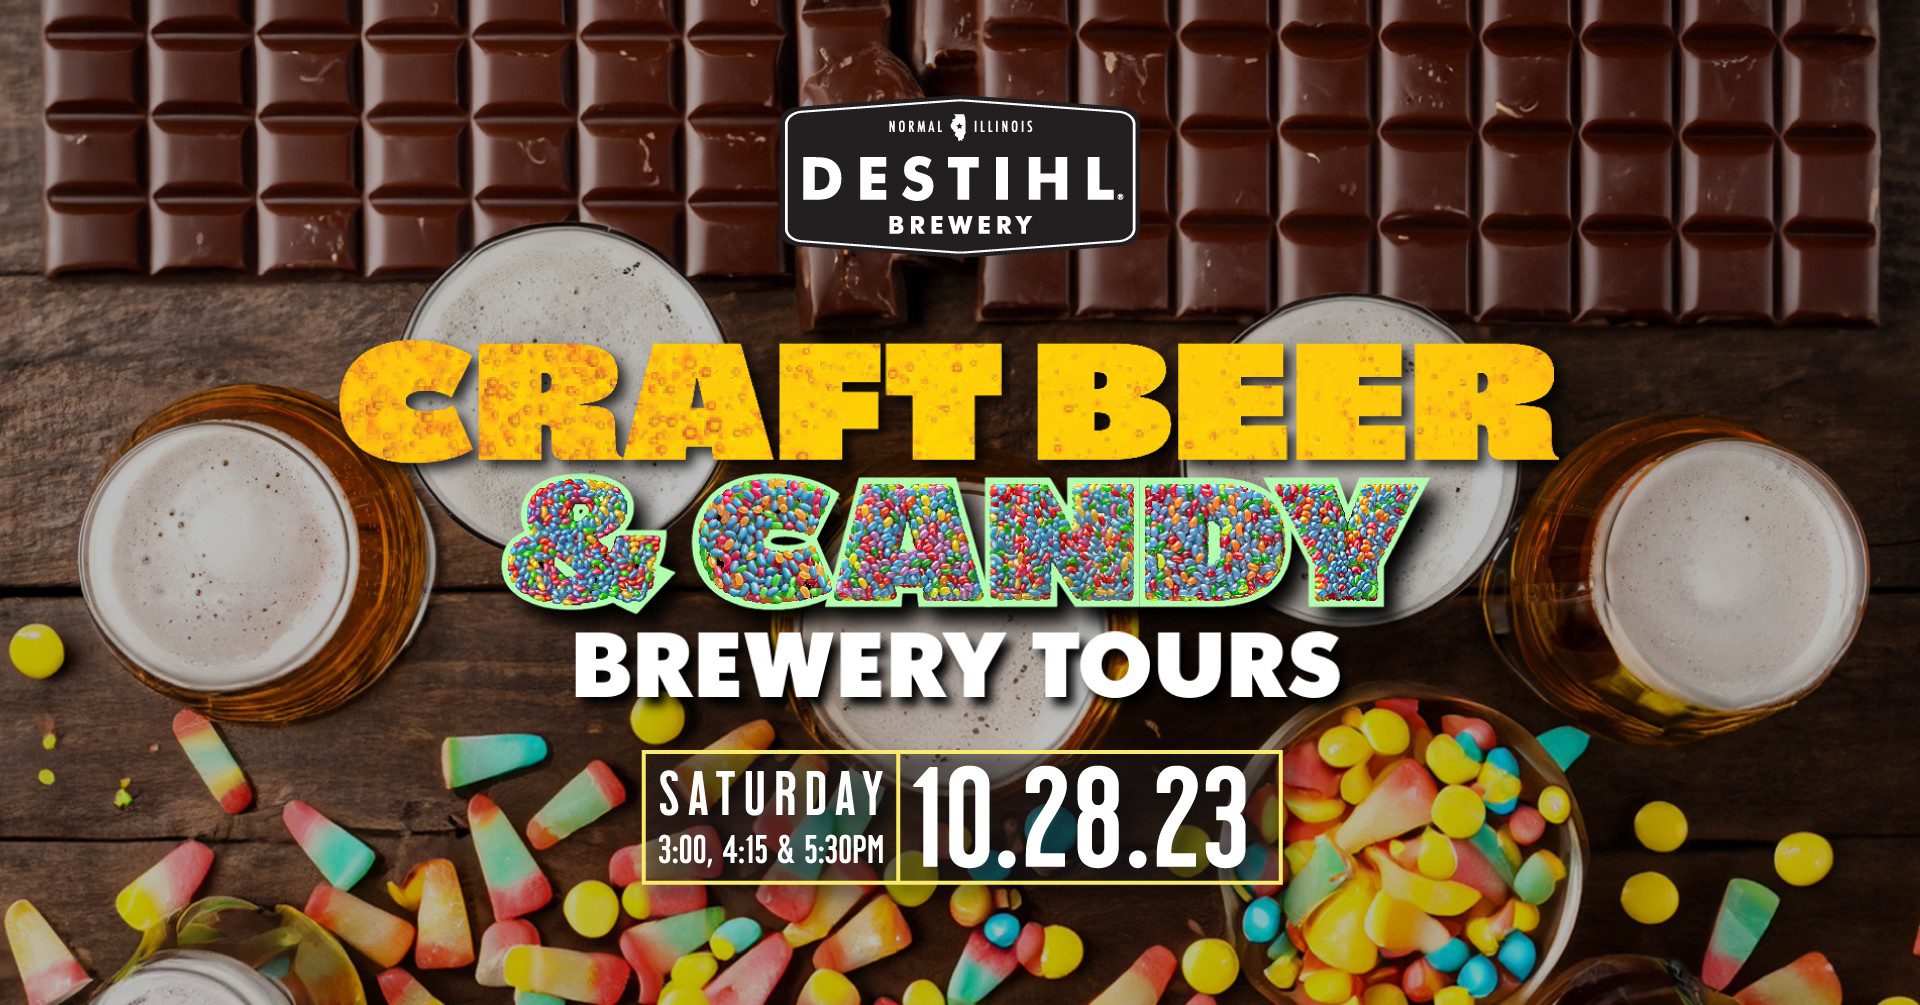 Destihl Brewery Craft Beer & Candy Brewery Tours